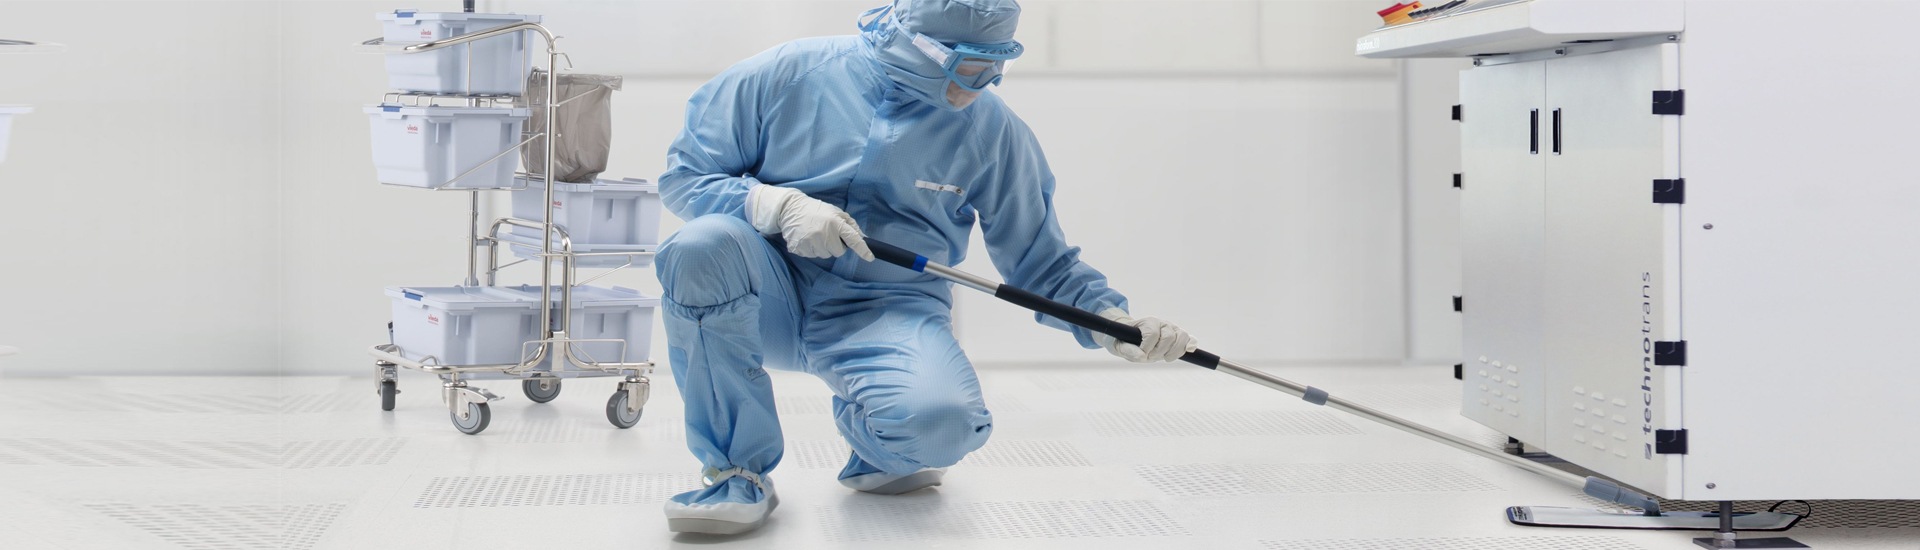 Expert in Floor Cleaning within Controlled Environment